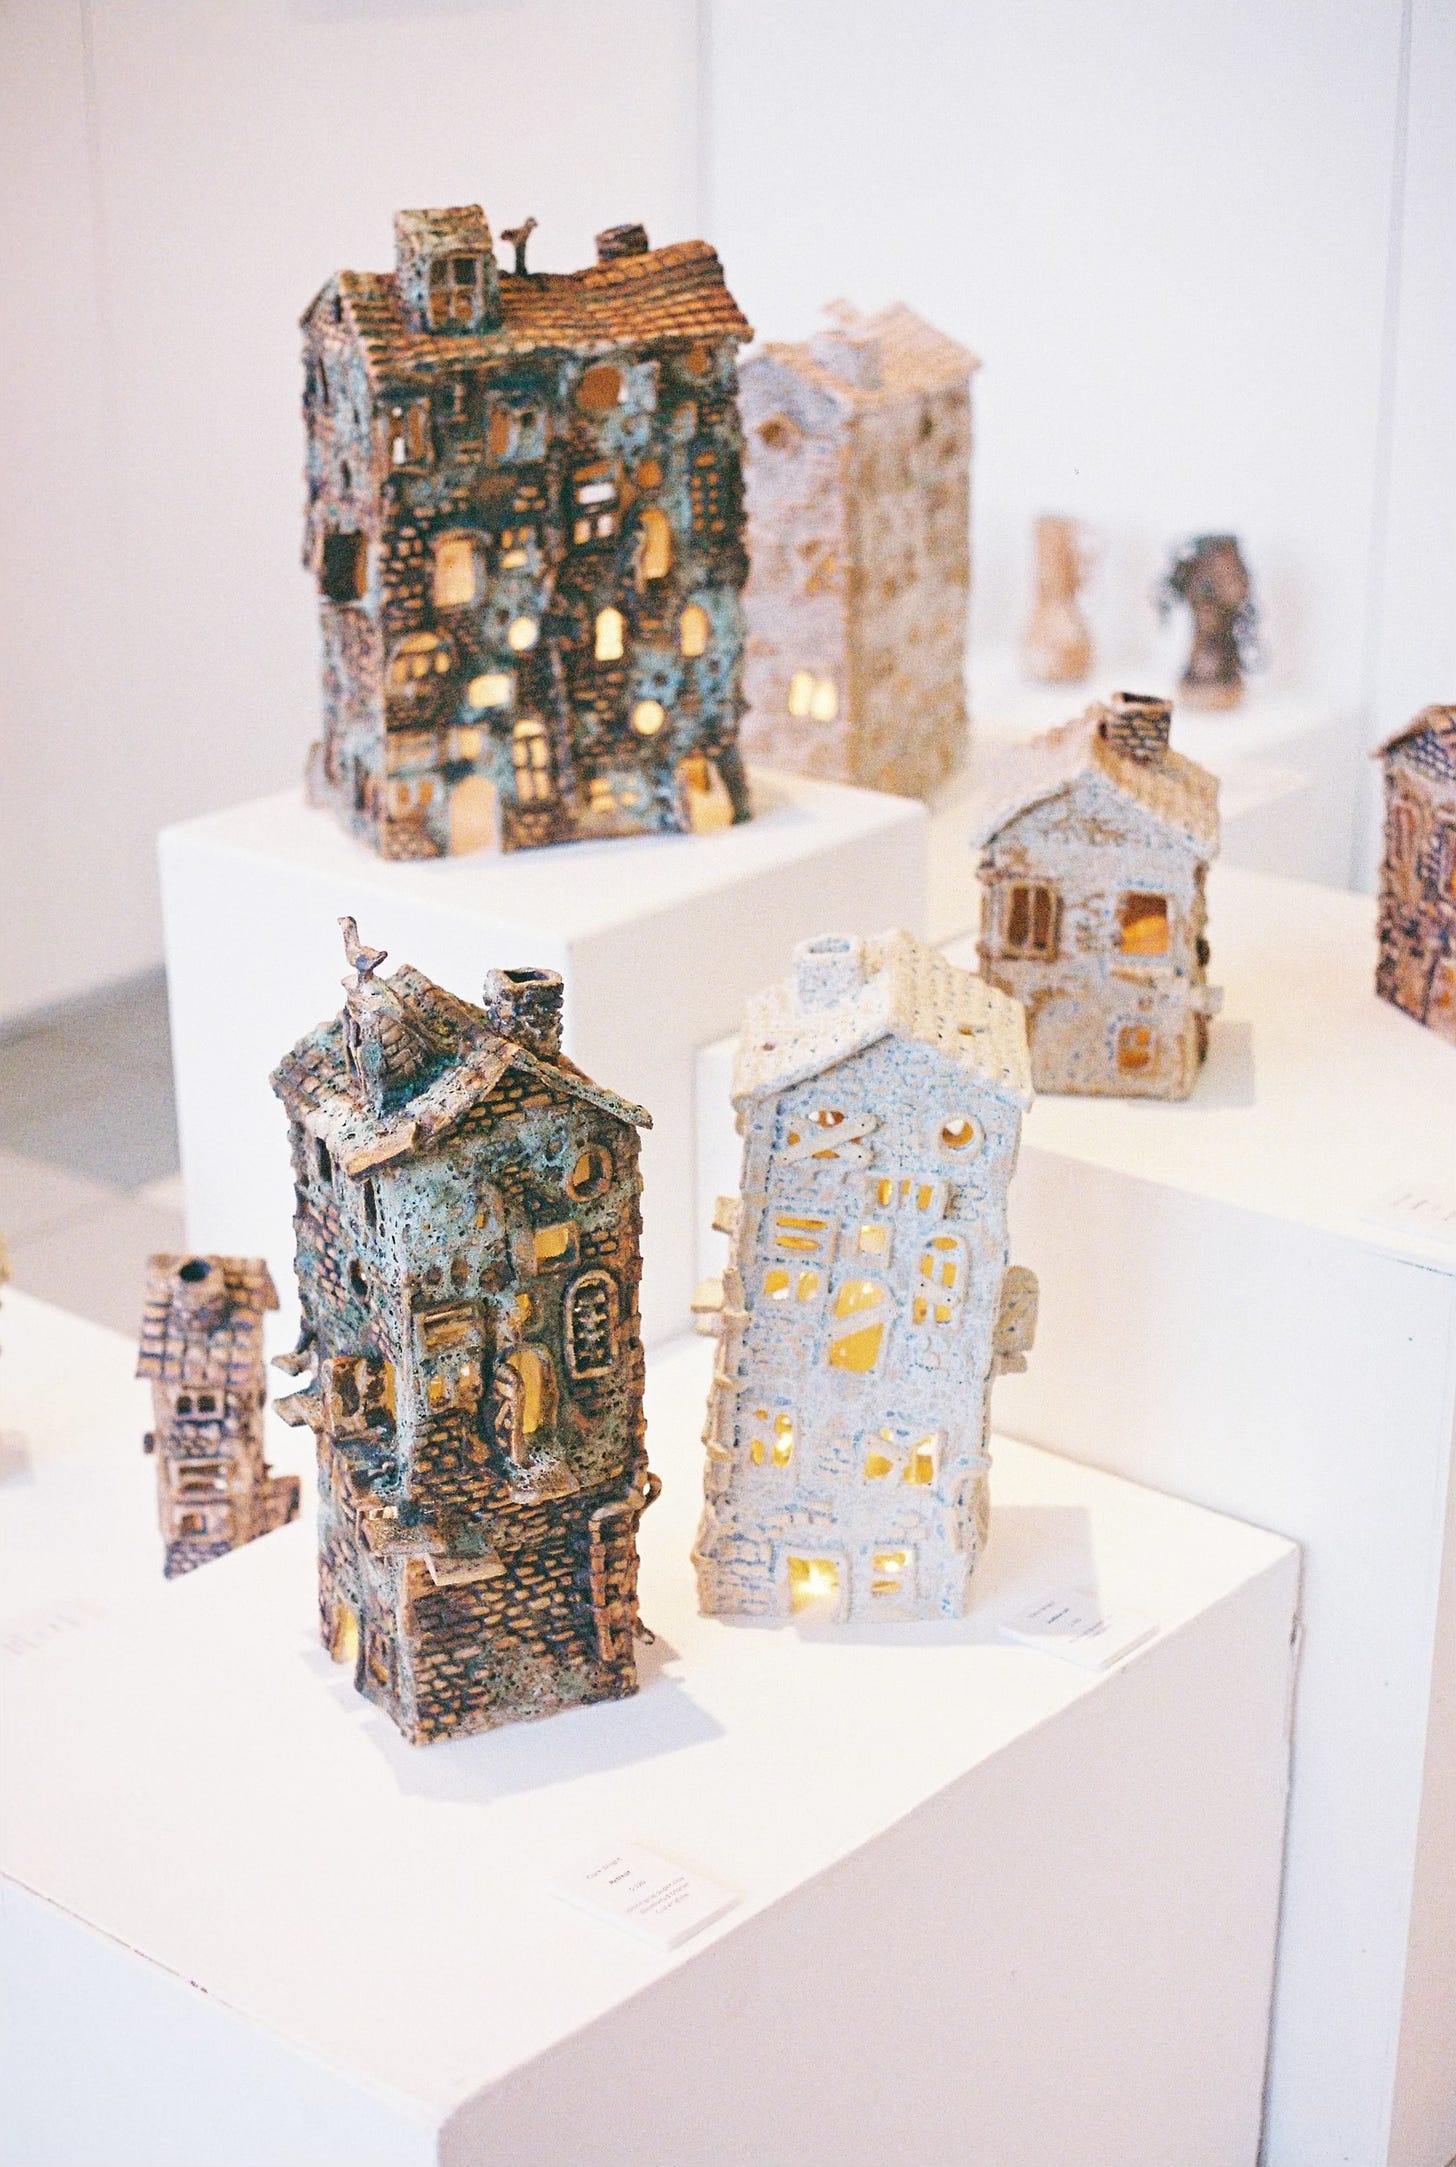 Clare Wright's Ceramic houses at her TAFE exhibition